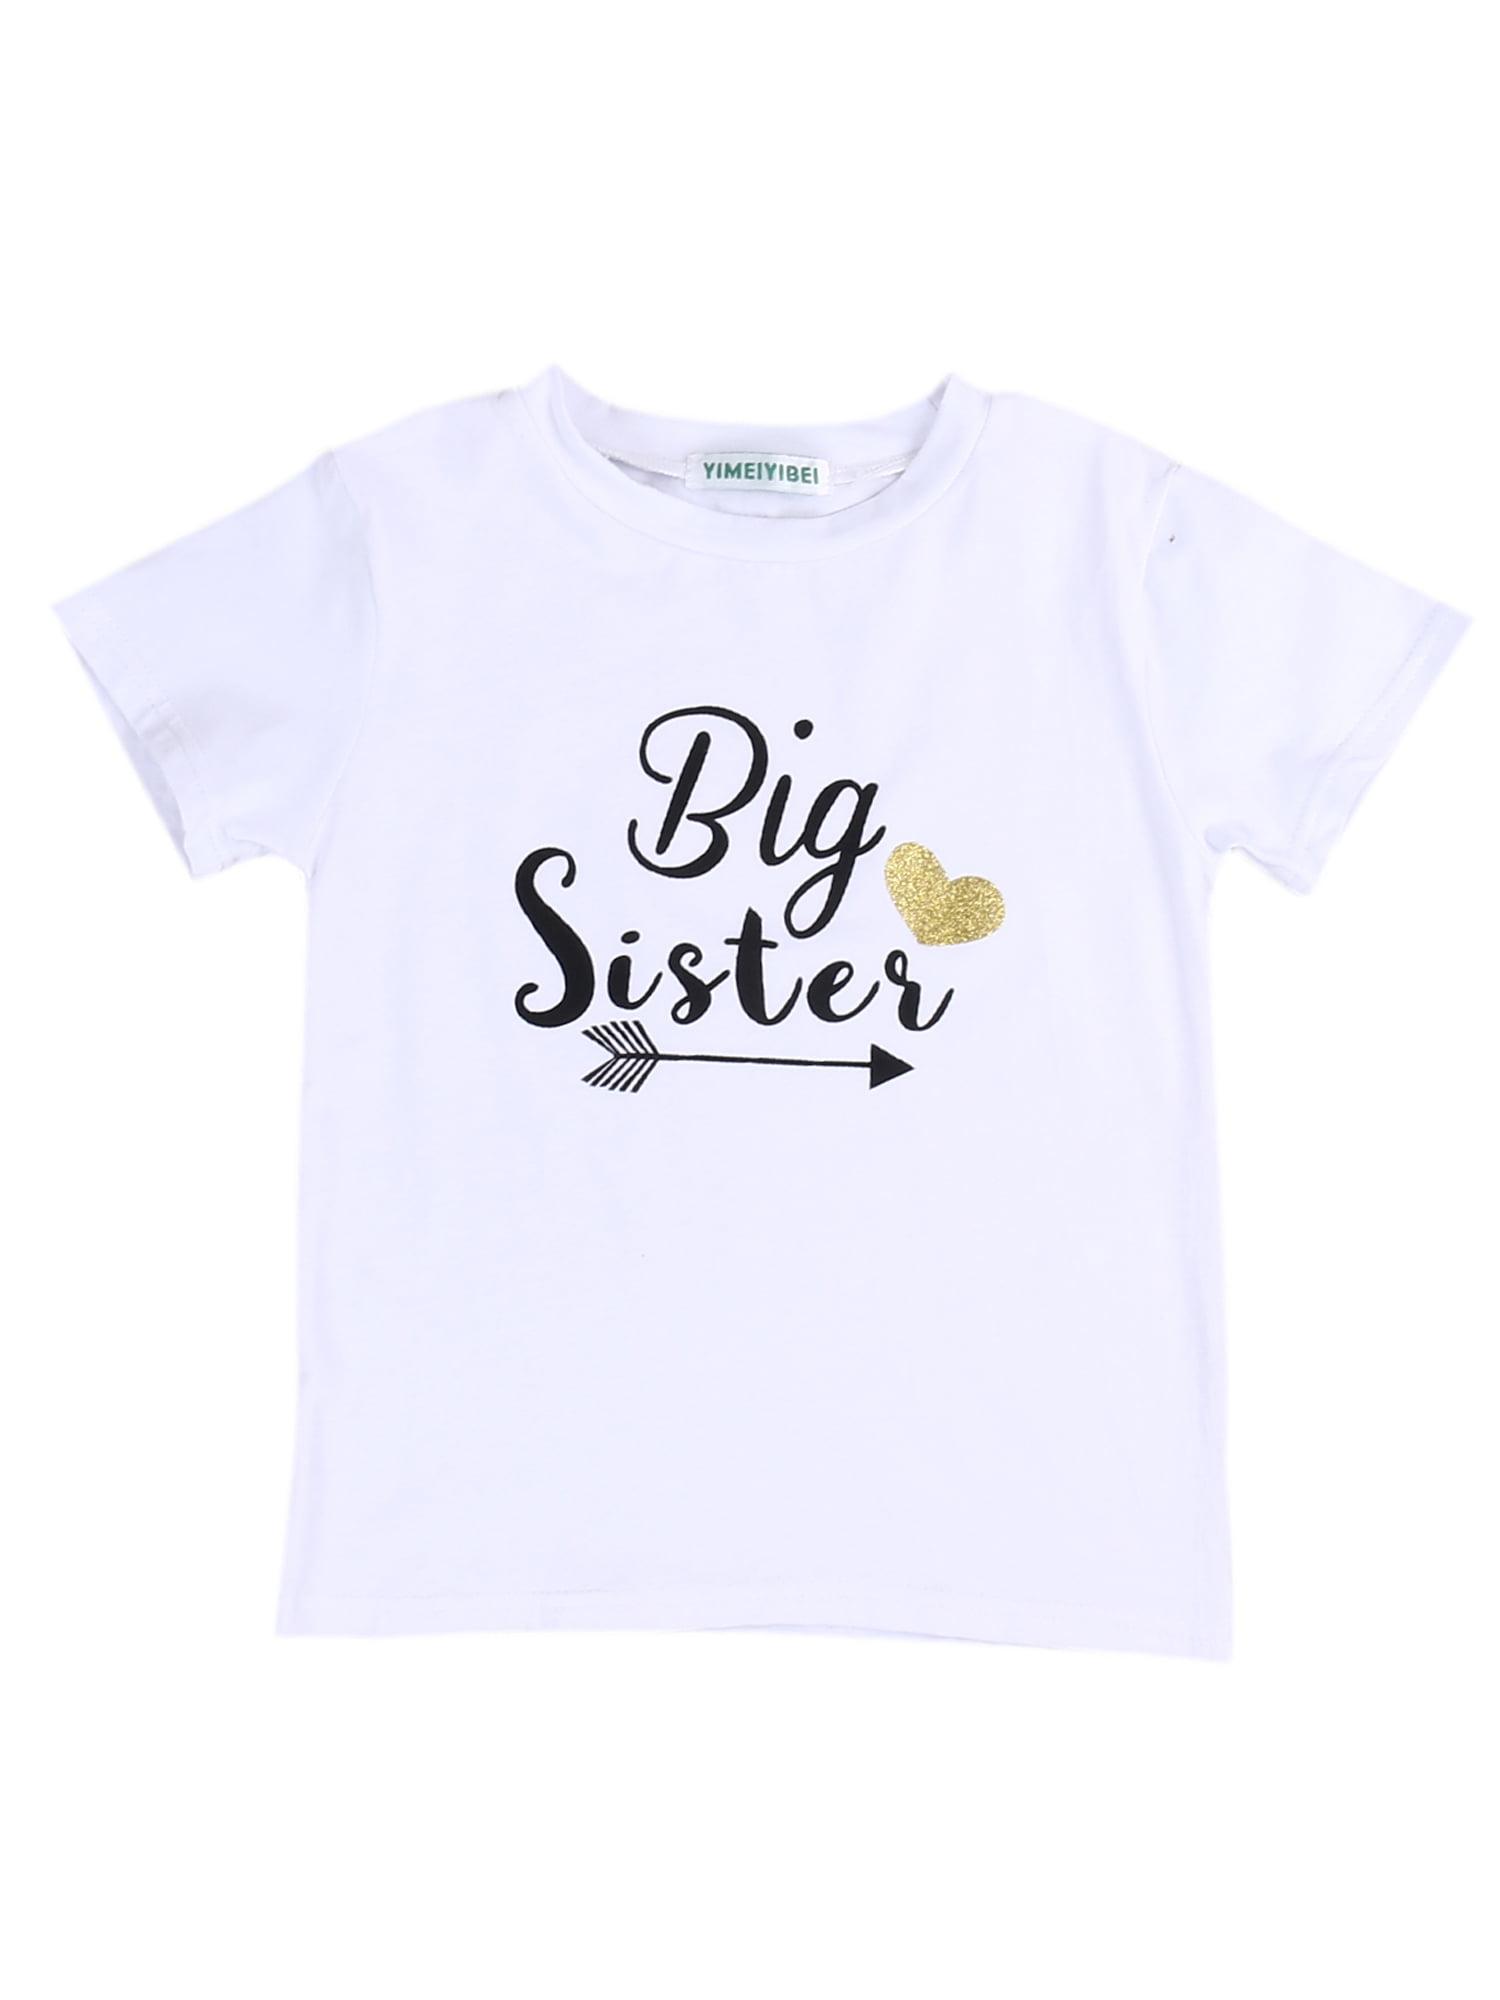 Newborn Baby Kids Little Brother Romper Big Sister T-shirt Tops Clothes Outfits 